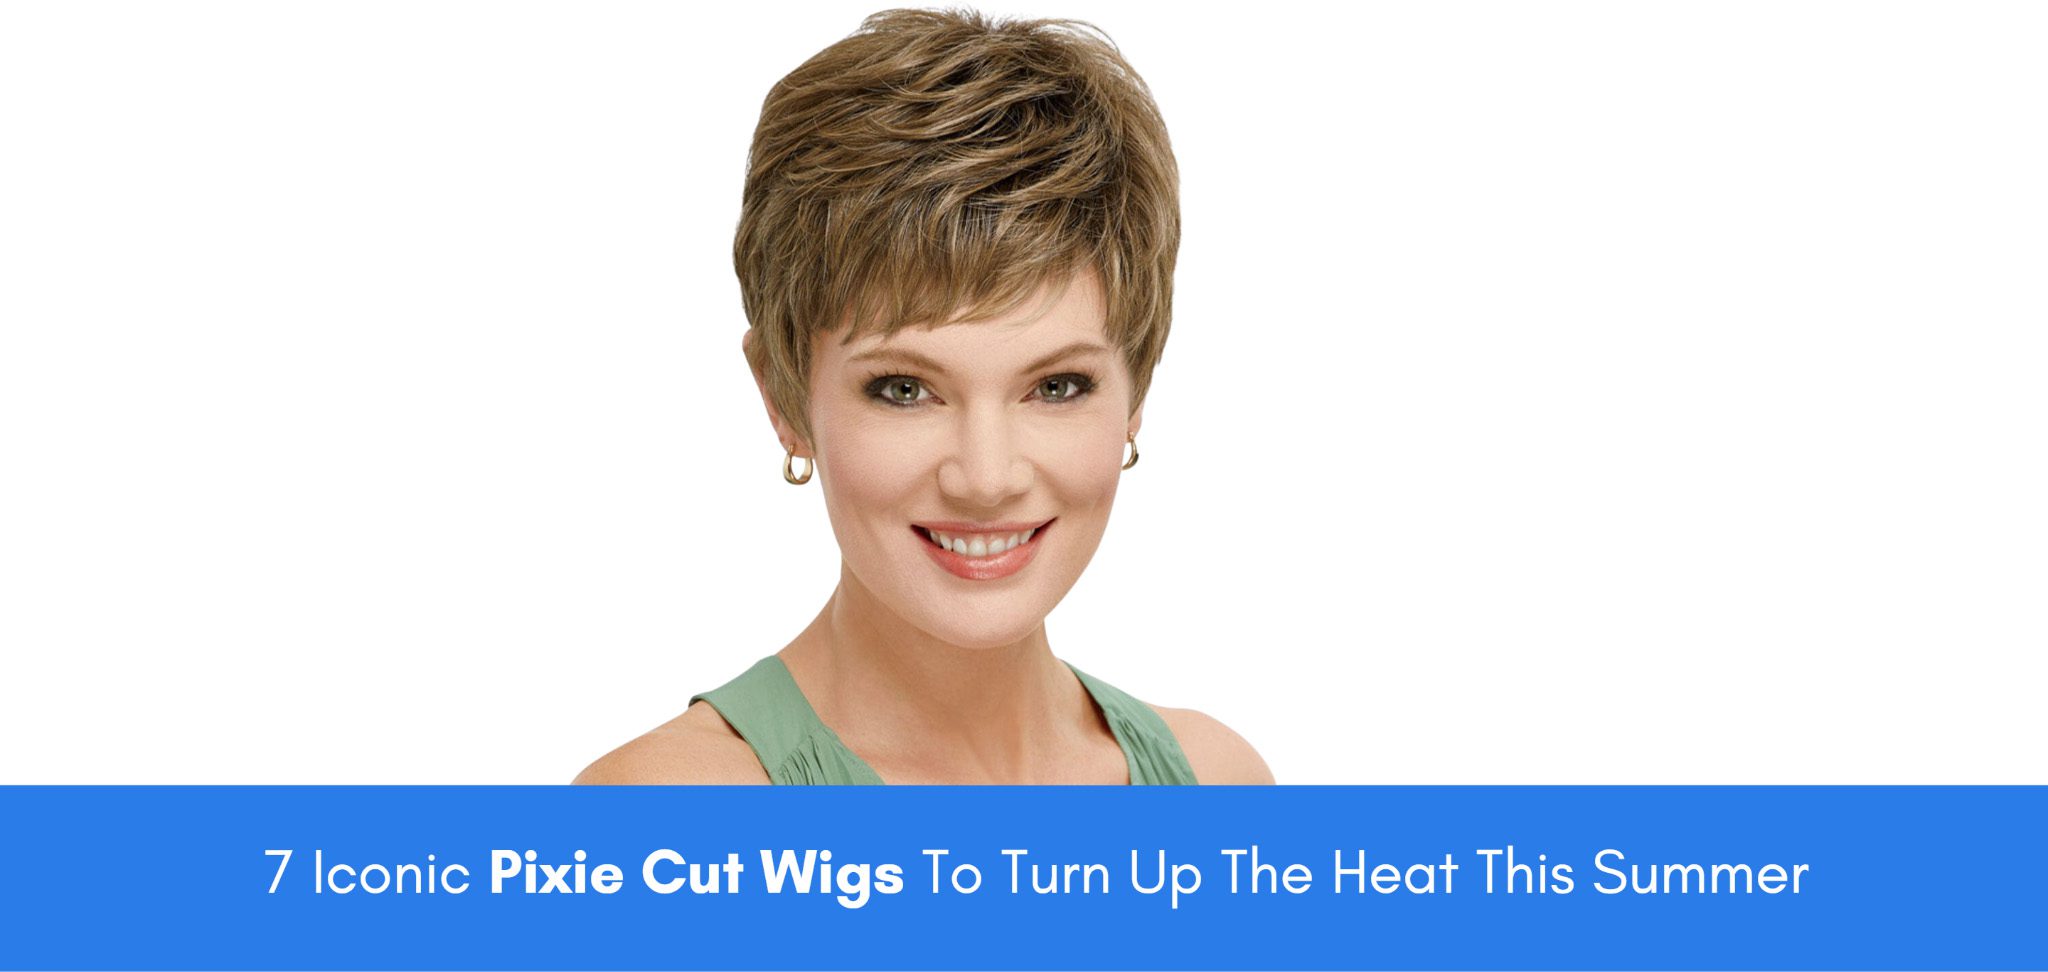 7 Iconic Pixie Cut Wigs To Turn Up The Heat This Summer